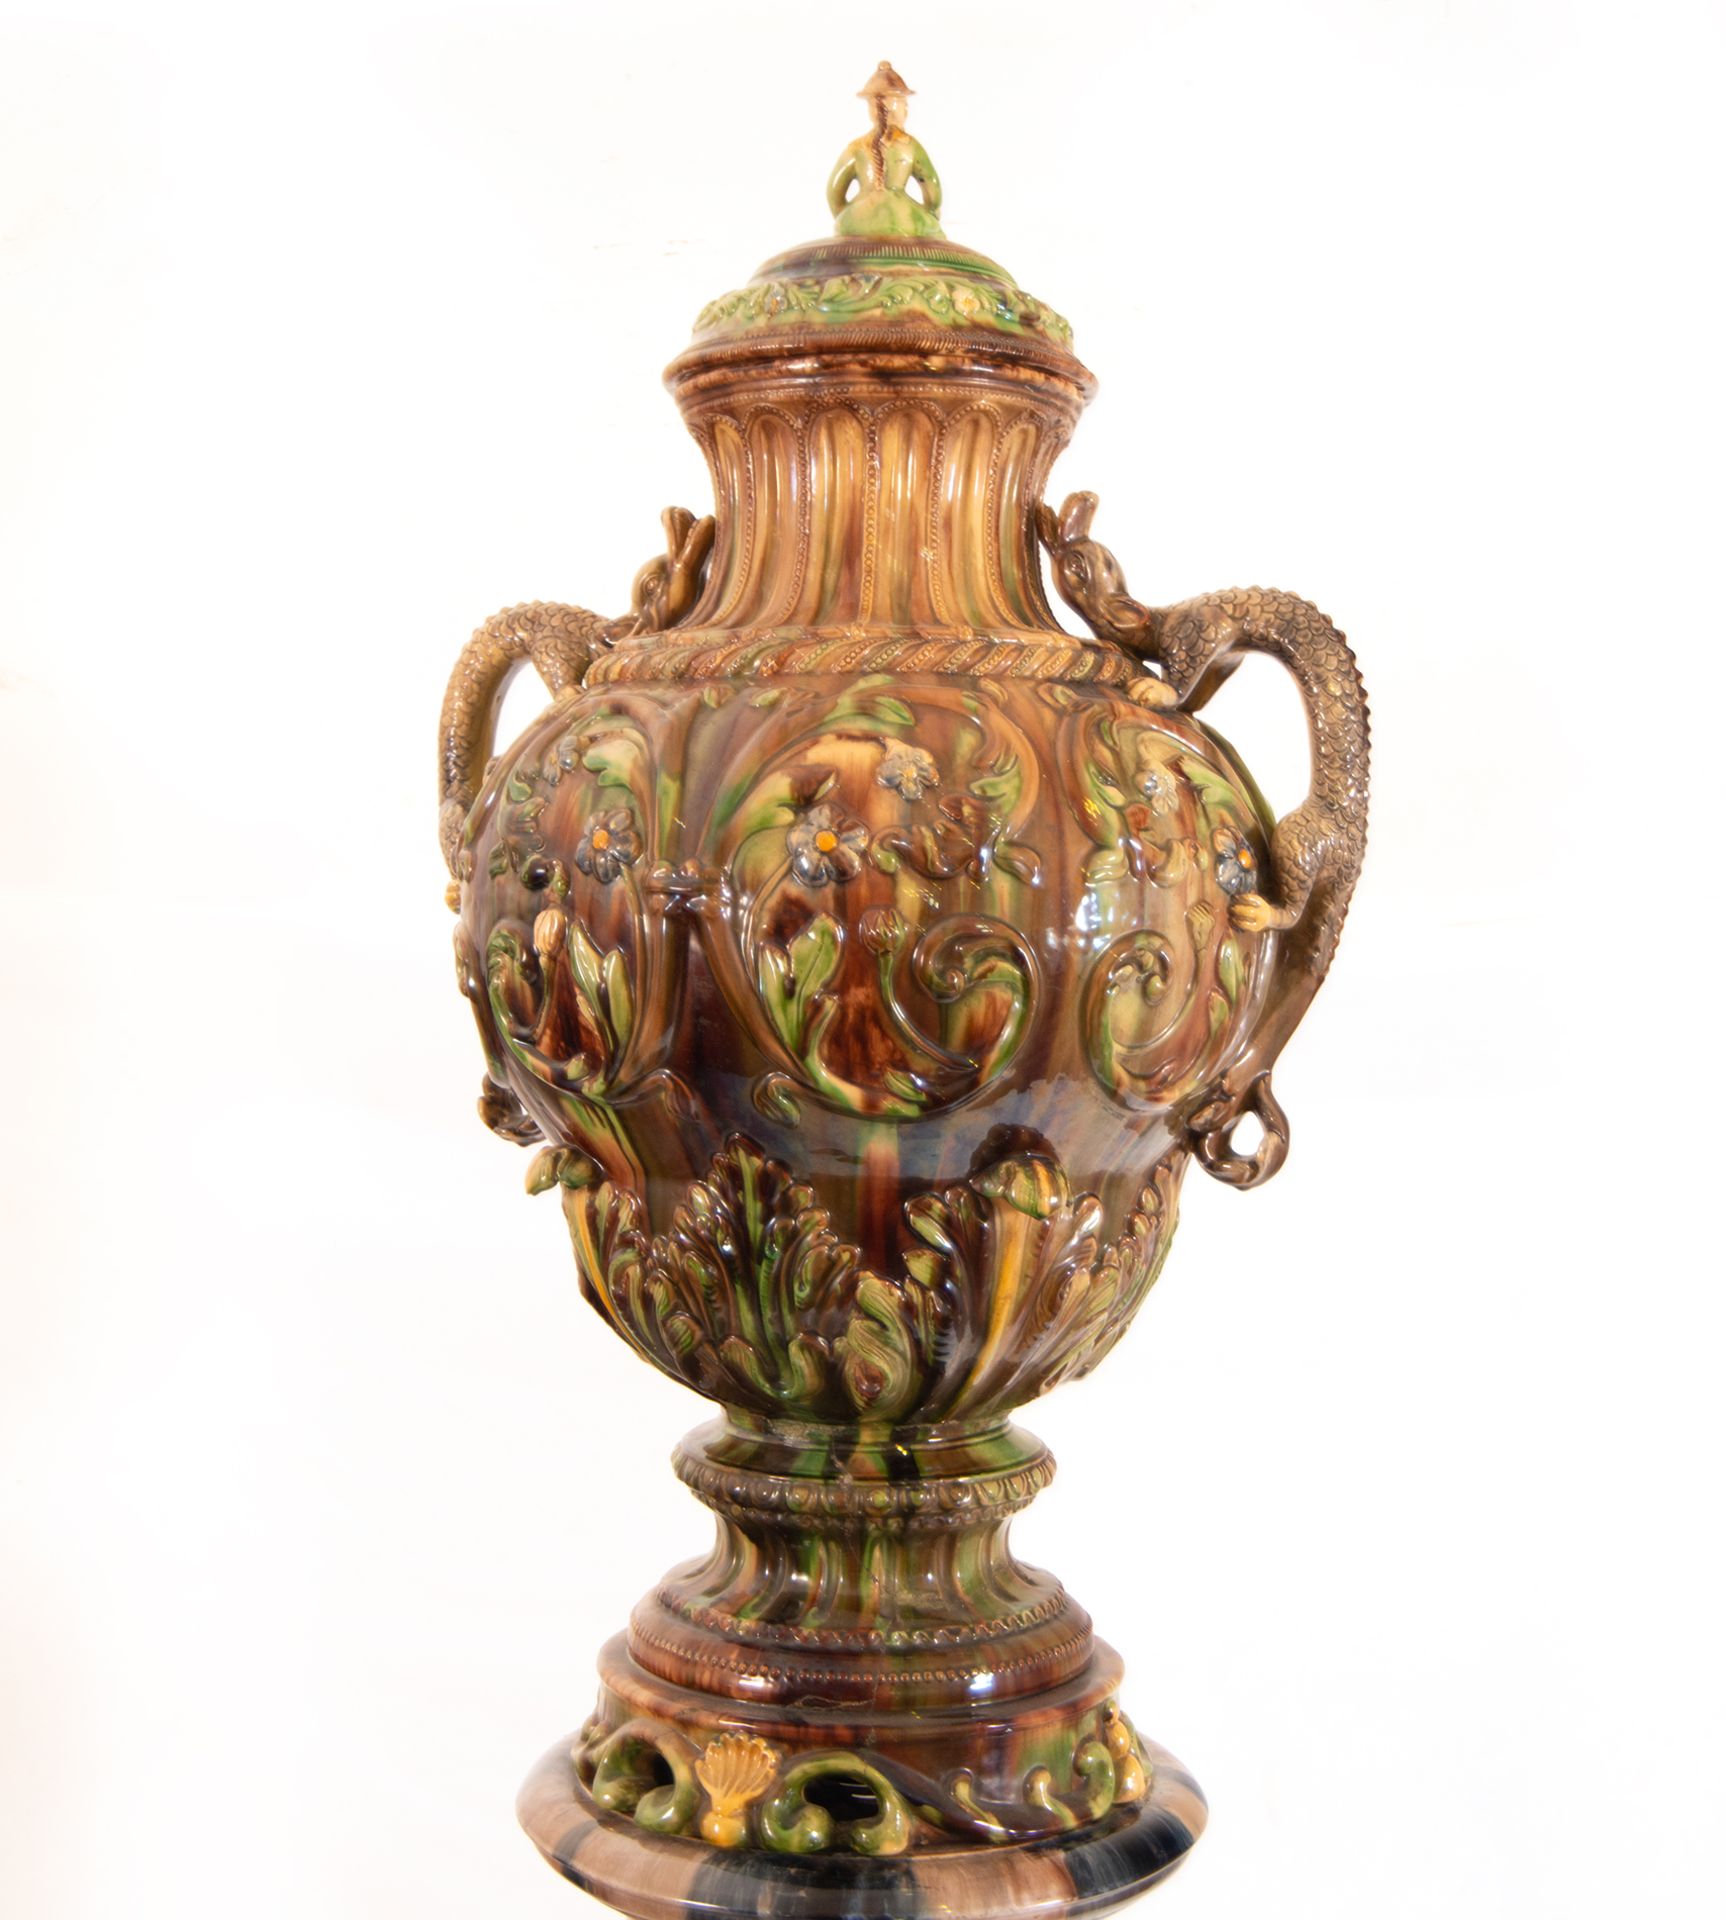 Ewer in enameled stoneware in the Art Nouveau style, French or Italian school of the 19th - 20th cen - Image 8 of 11